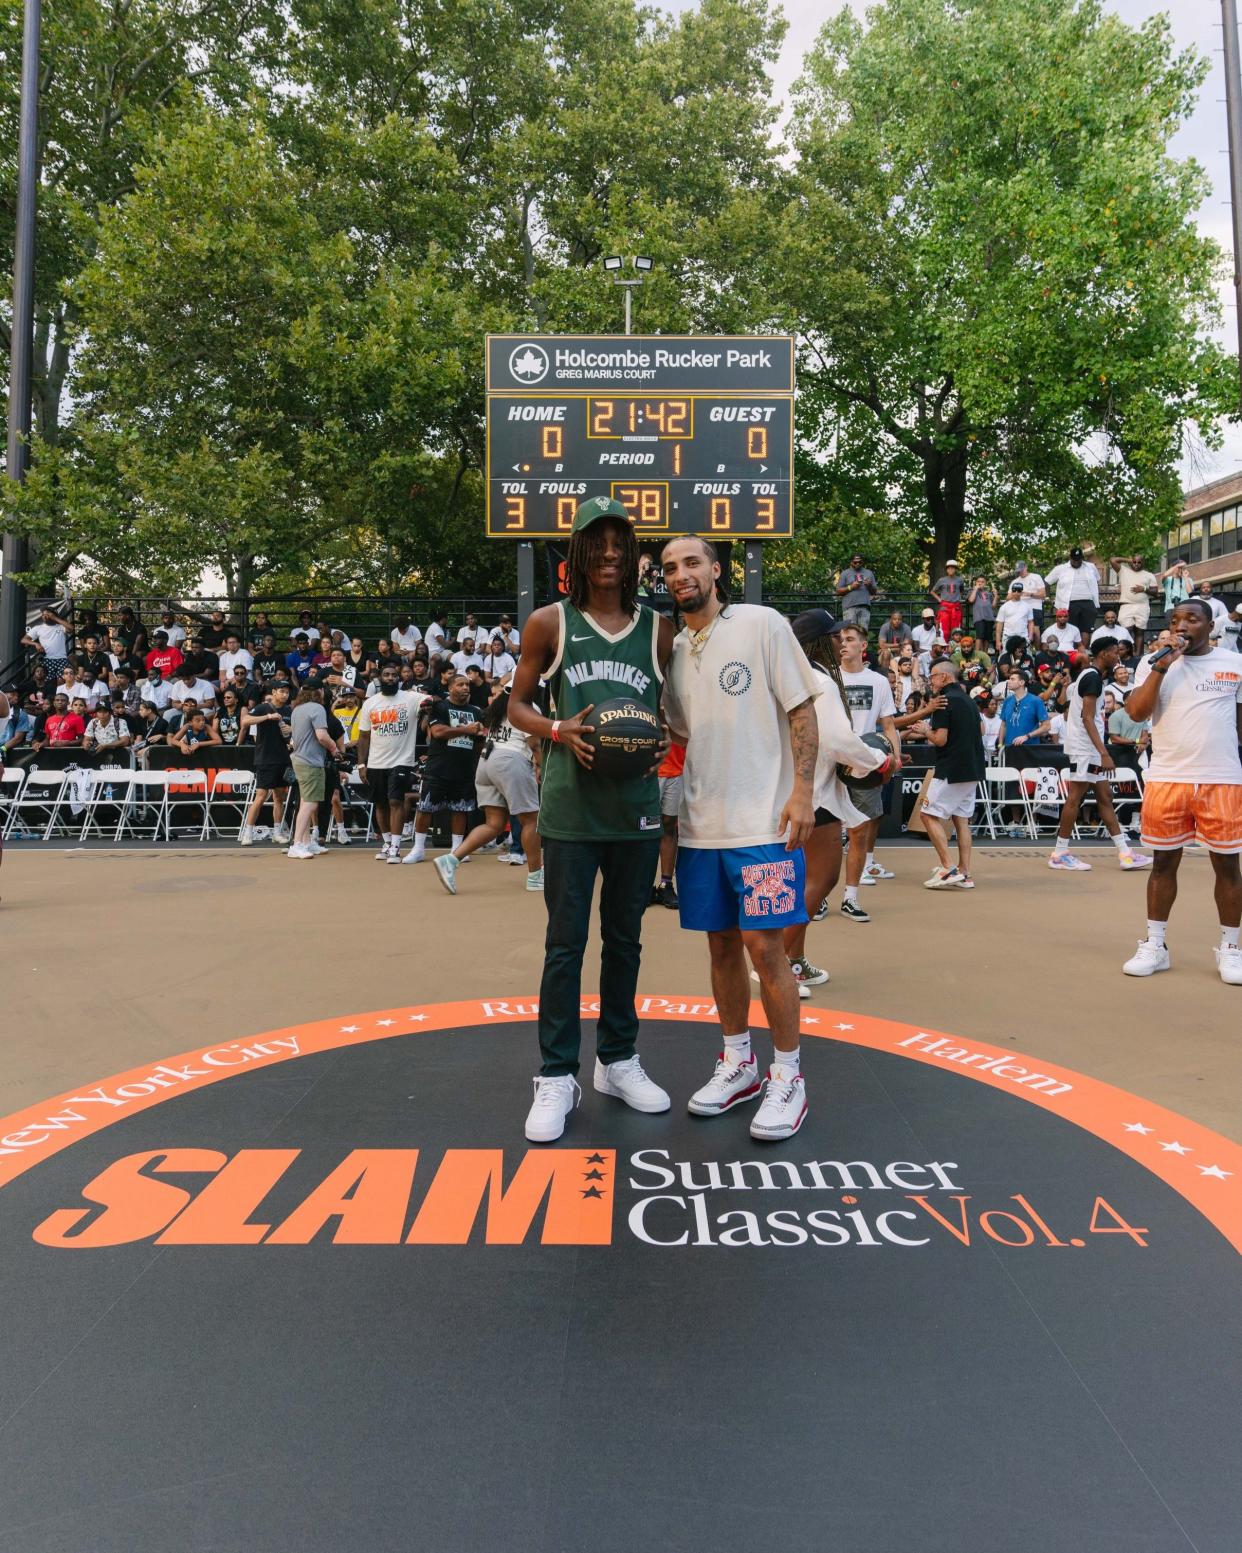 MacDowell Montessori School eighth-grader Dooney Johnson, left, poses with New Orleans Pelicans point guard Jose Alvarado after receiving the People's Champ Award at the second annual NBPA Players' Voice Awards NextGen at historic Rucker Park in New York on Aug. 16.